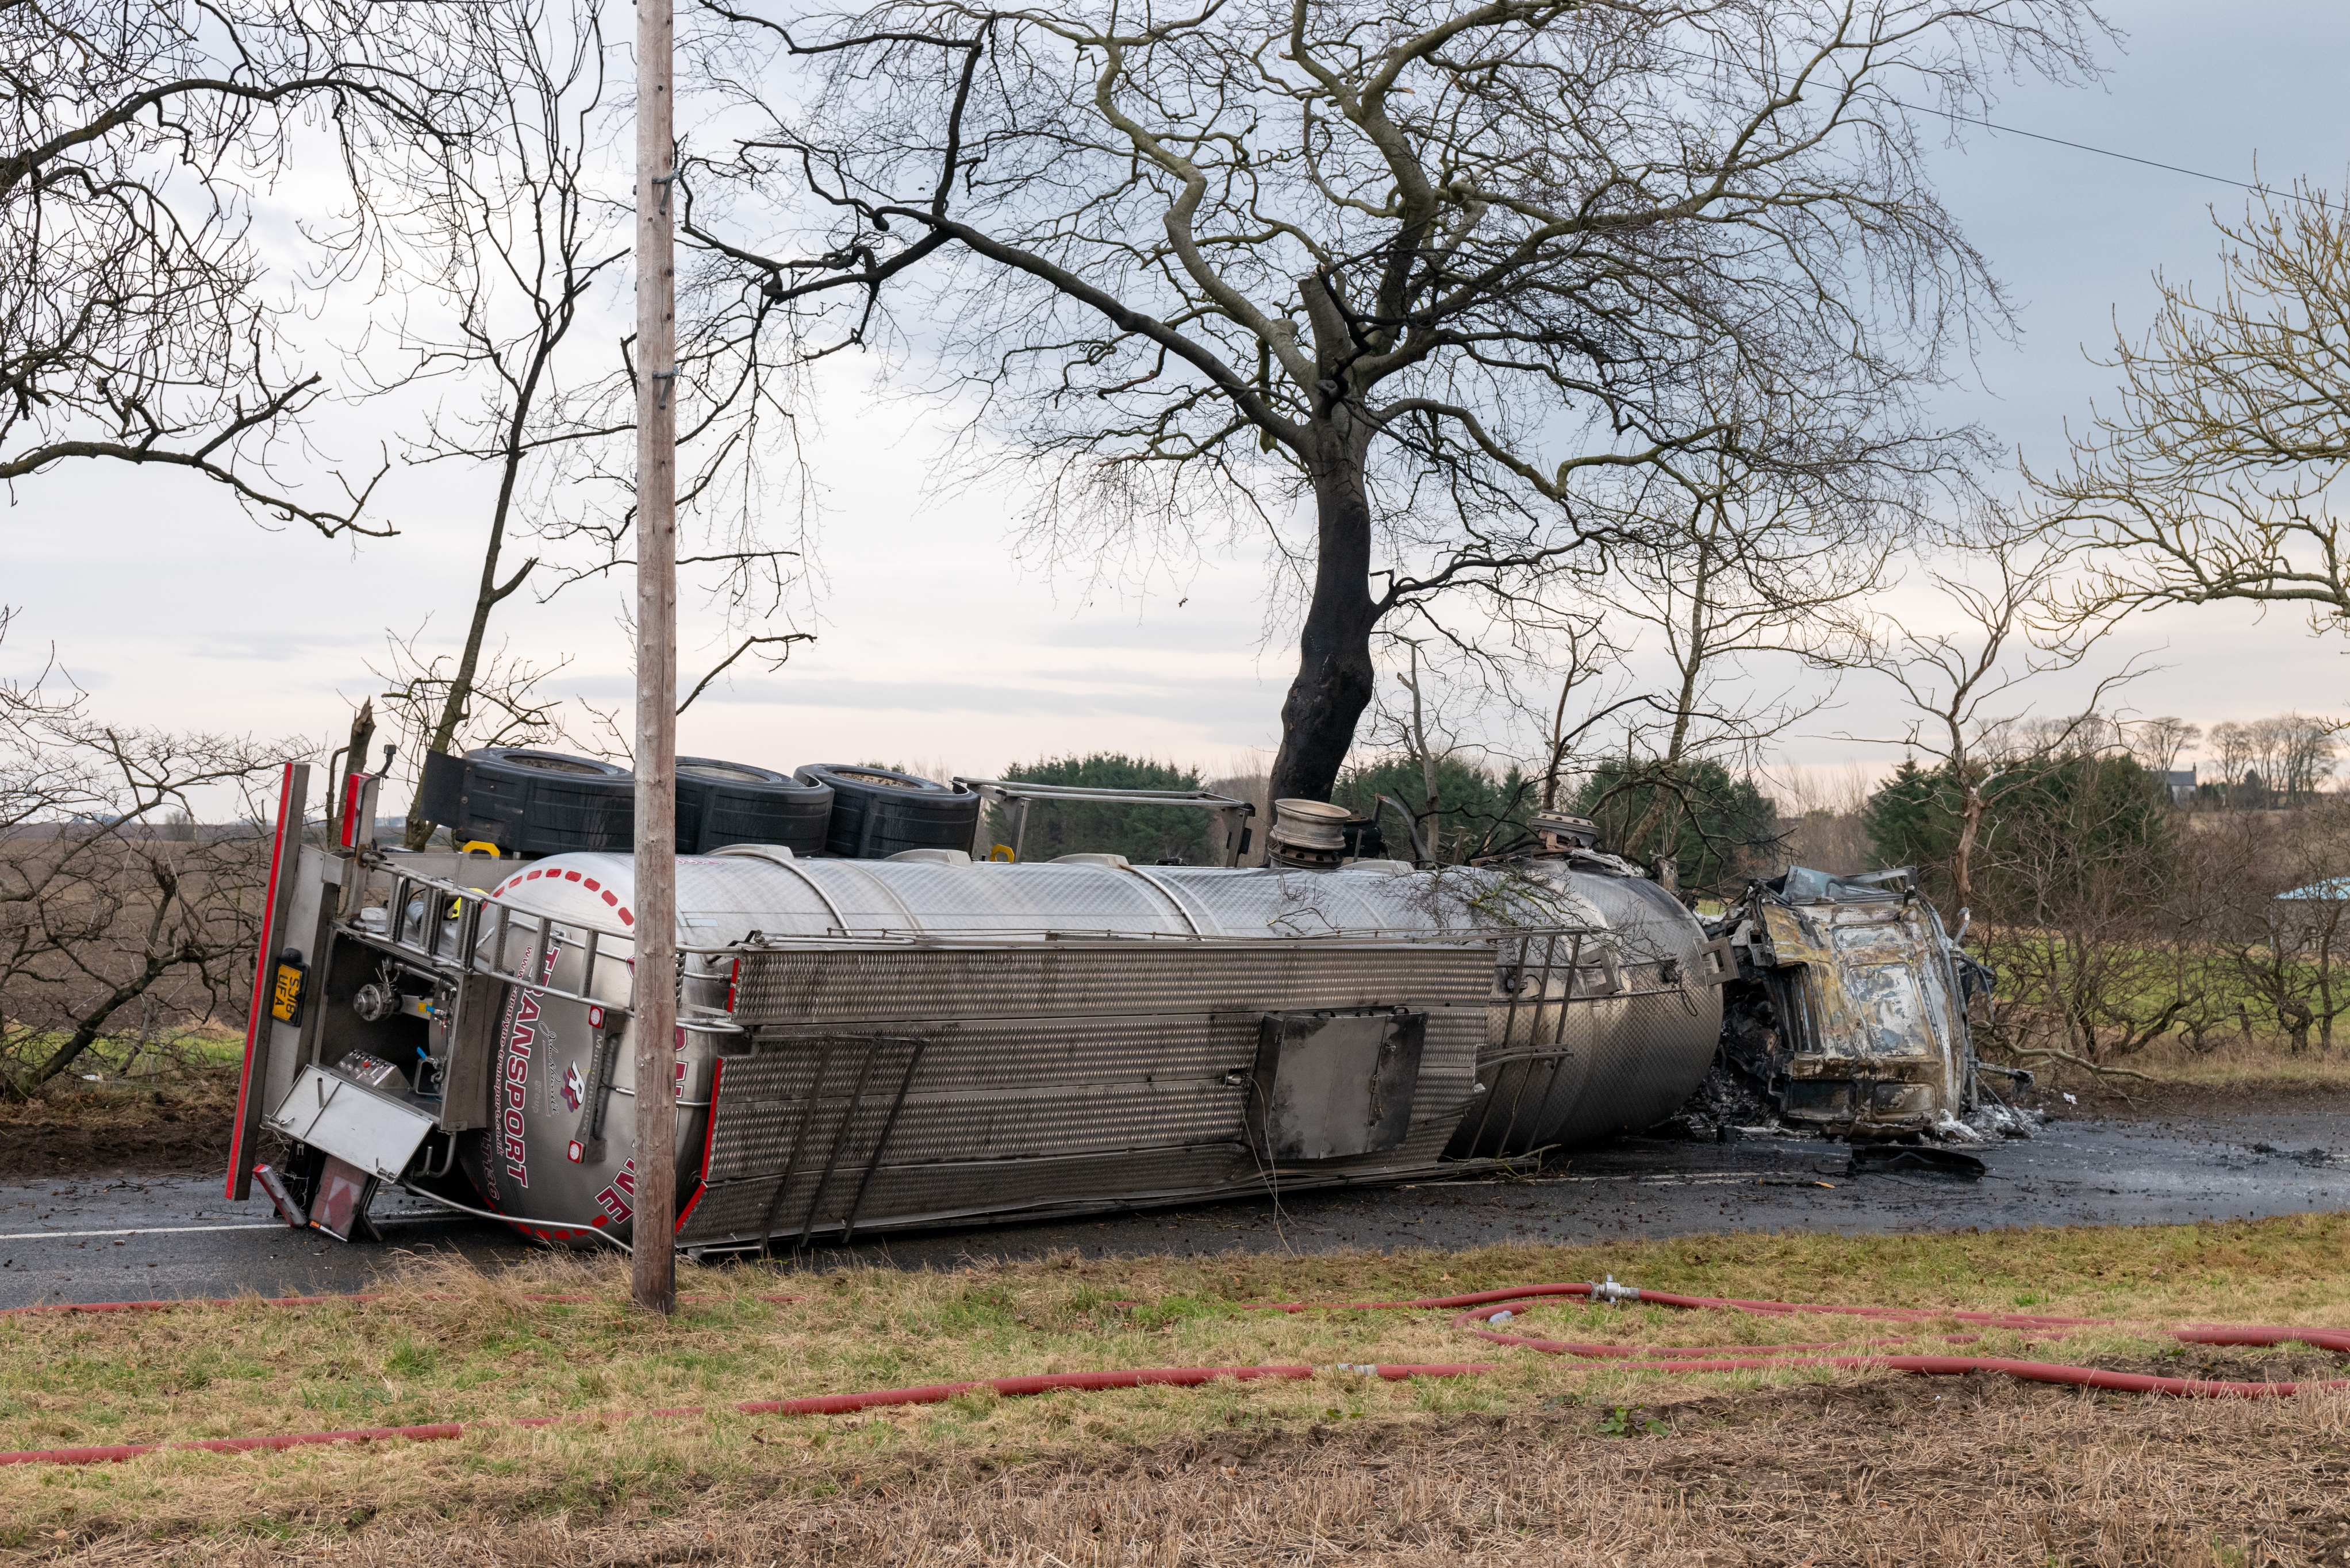 The tanker appeared to have crashed, overturned and caught fire.